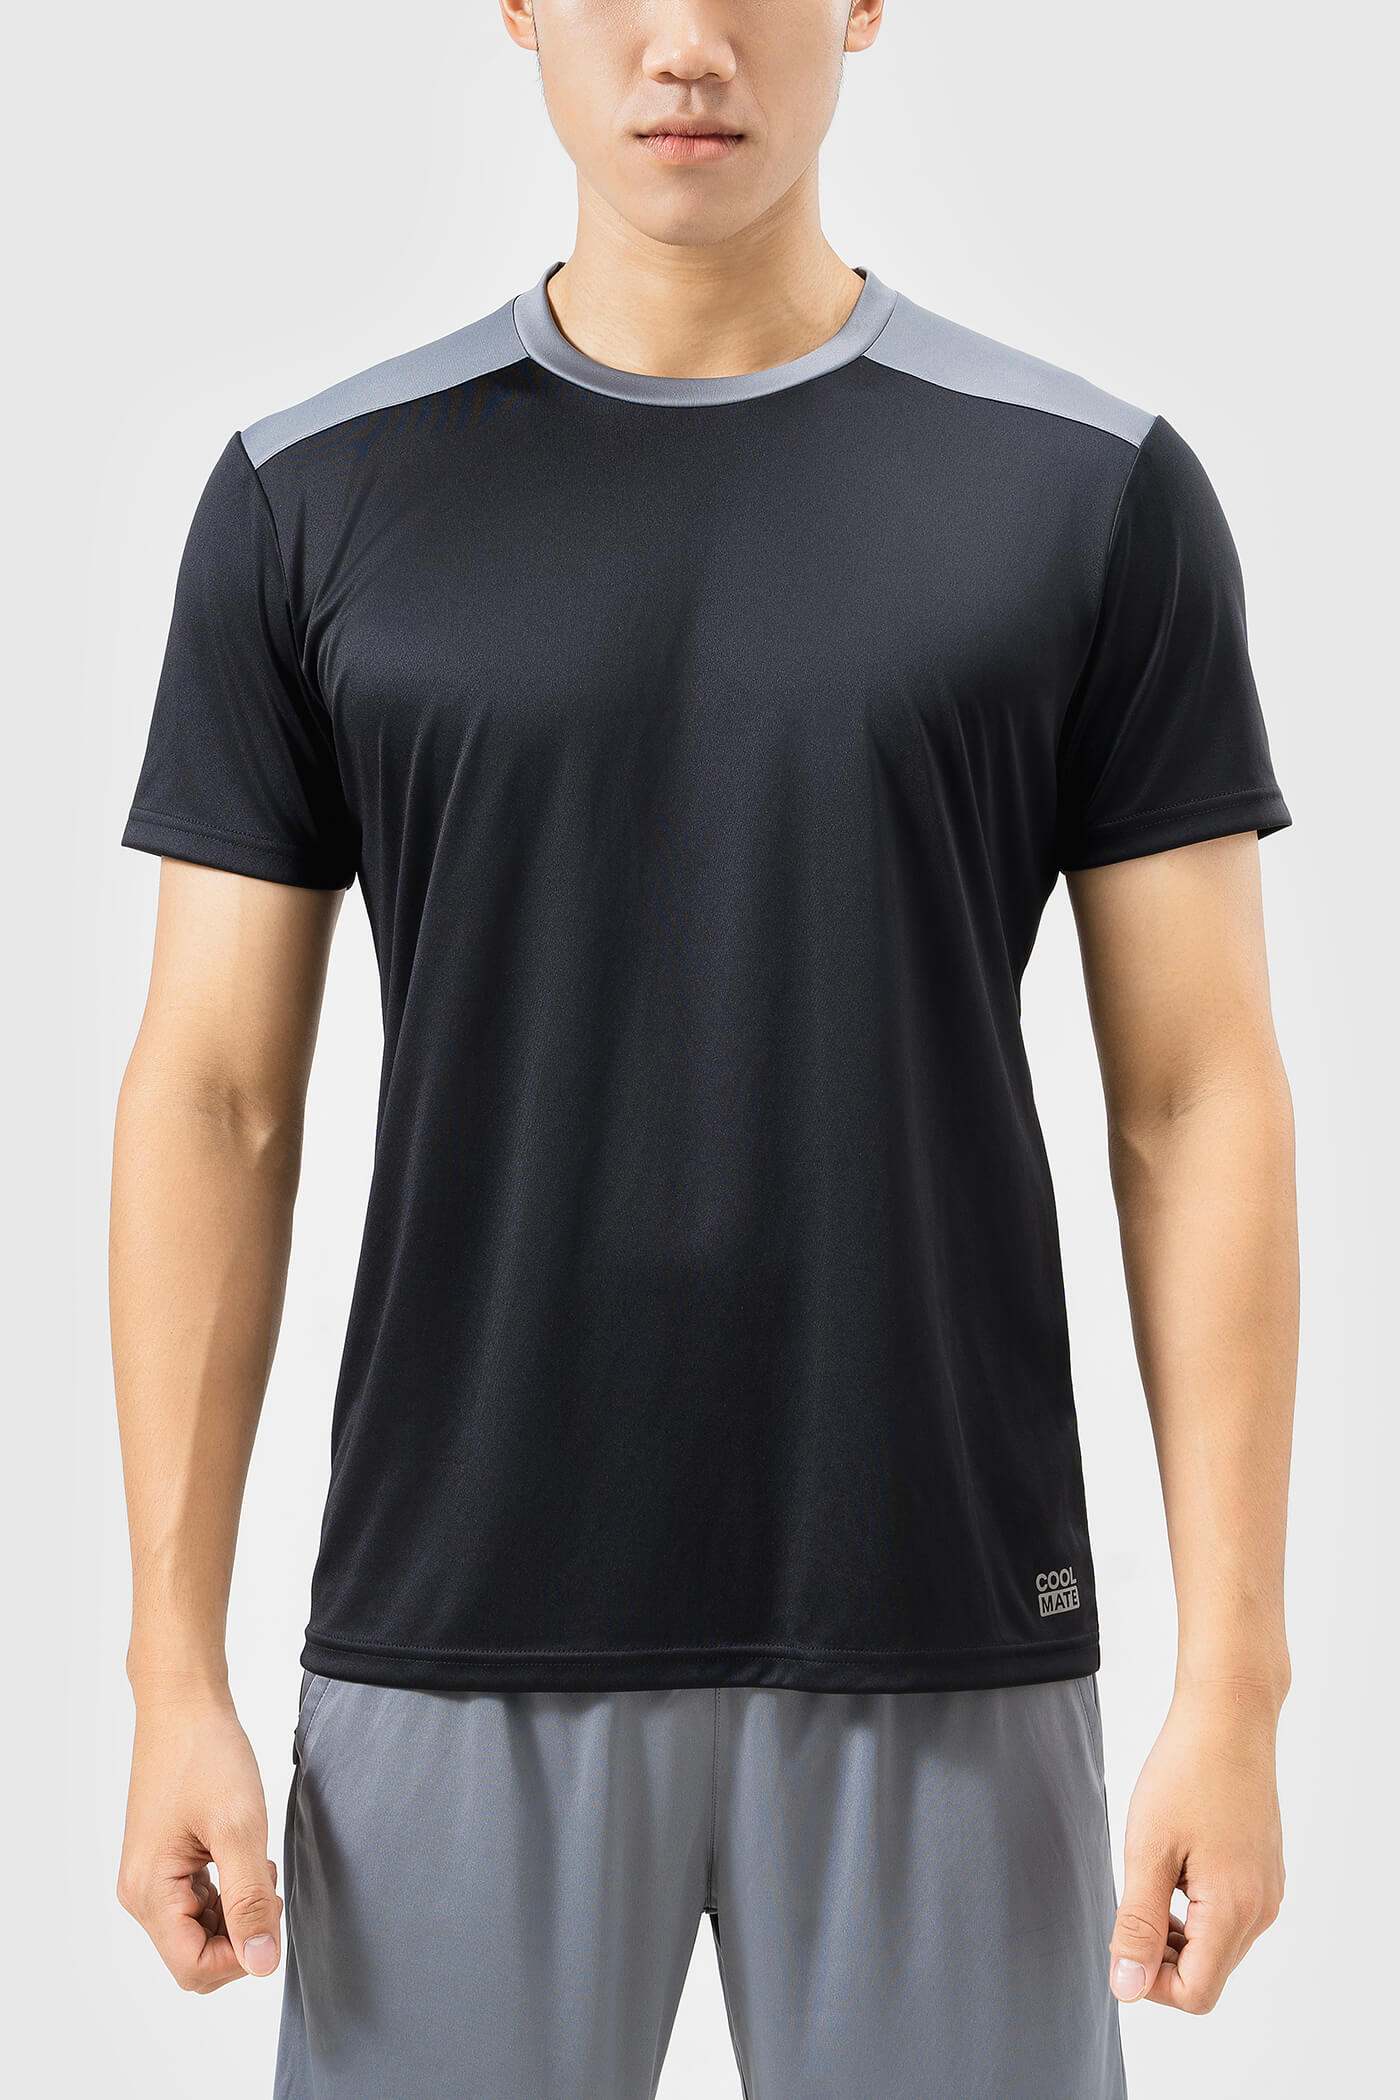 T-Shirt thể thao Active 